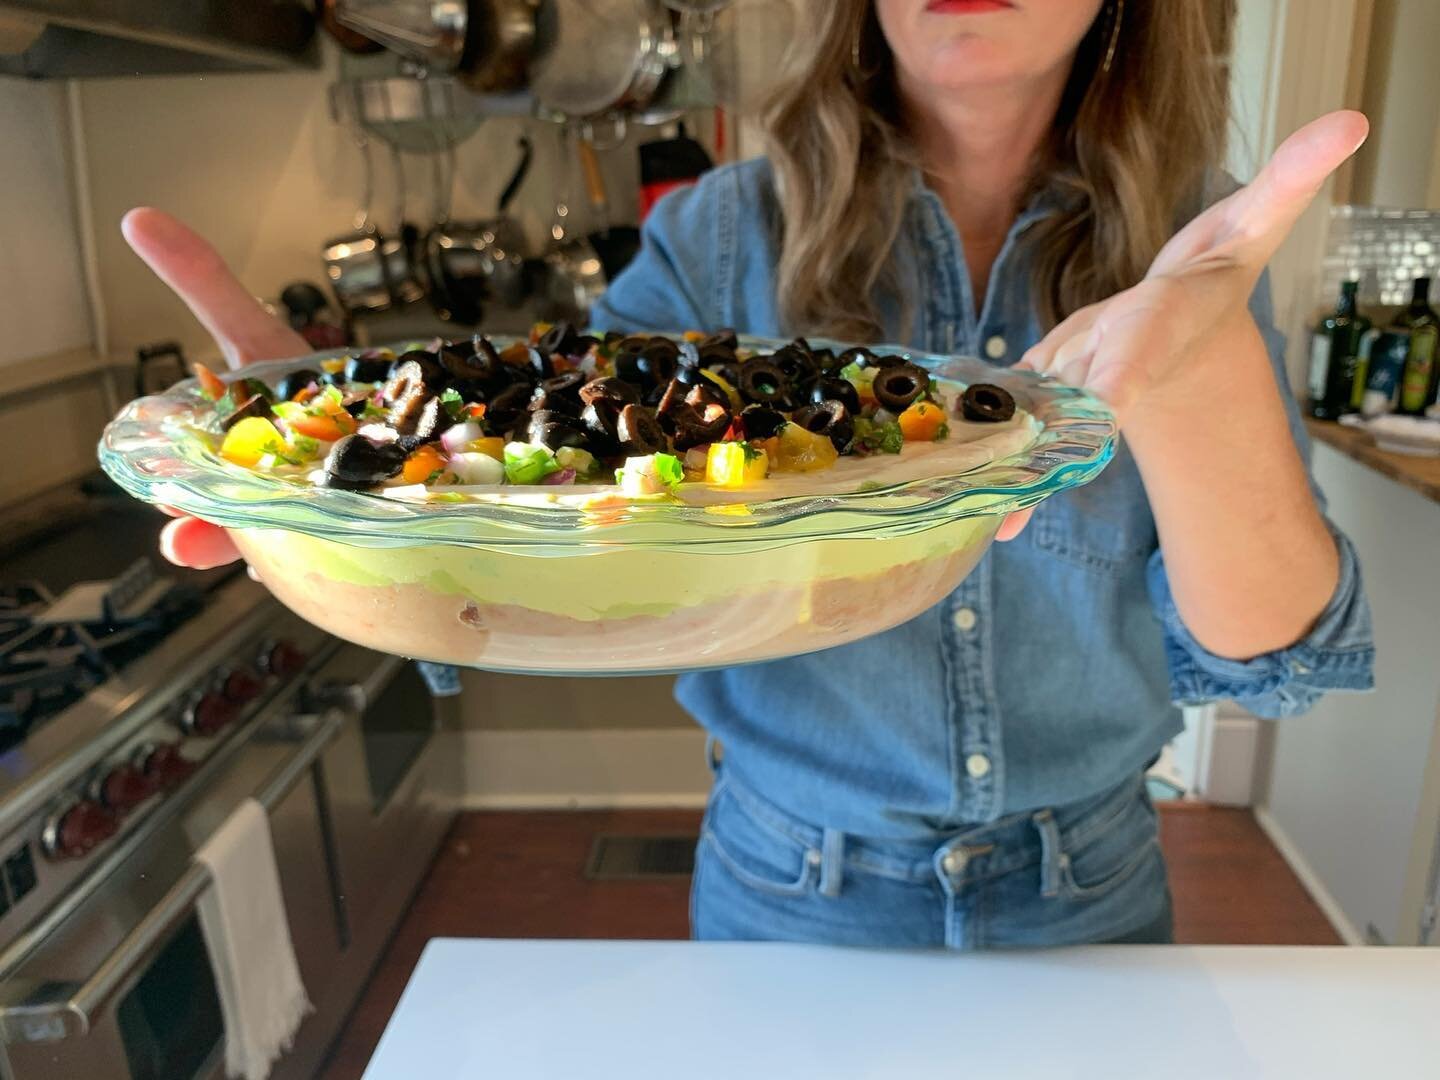 Make #jalantro a part of your Labor Day plans! Here we put a jar of Hot in a 7-layer dip and it was *chef&rsquo;s kiss* 💚🎉😁